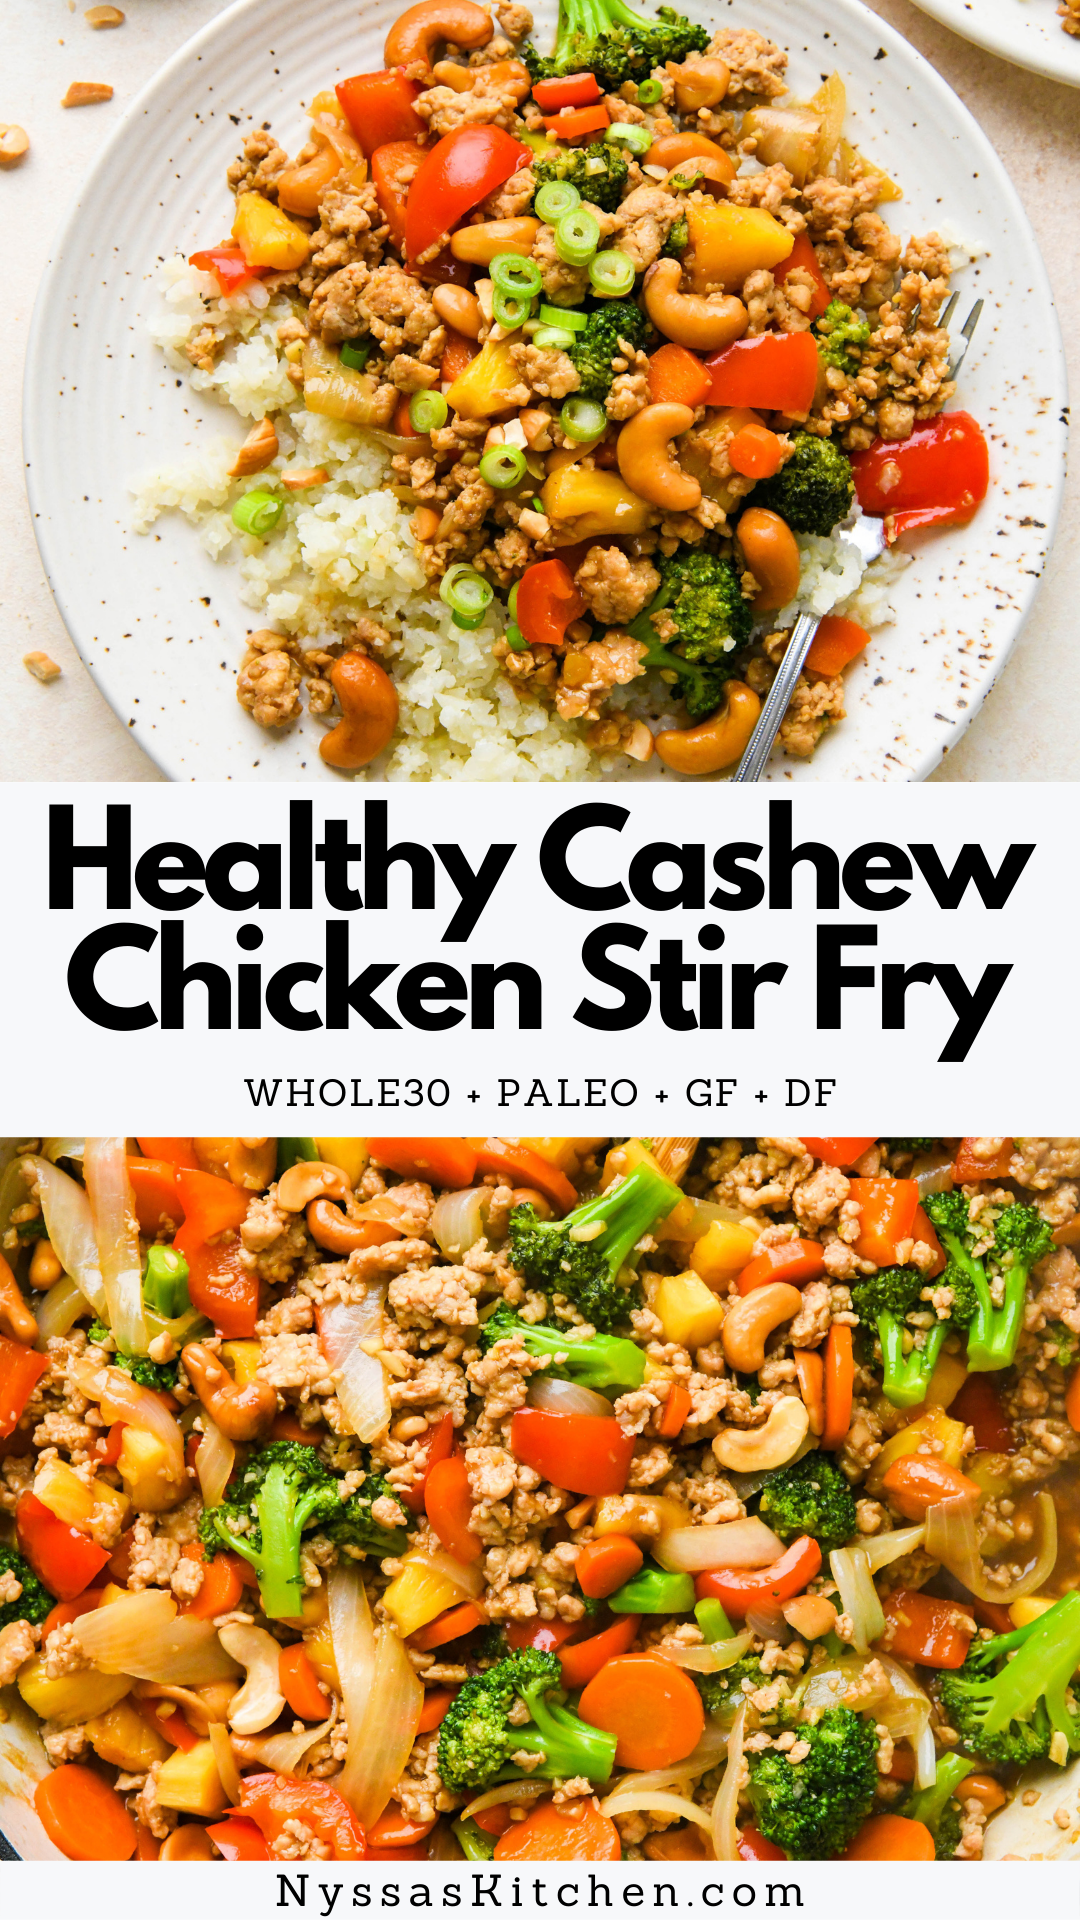 This healthy cashew chicken stir fry is the best weeknight homemade dinner recipe! Made with ground chicken, lots of veggies, pineapple, cashews, garlic, ginger, and a simple stir fry sauce. Ready in 30 minutes and so full of flavor! Whole30, paleo, gluten free, dairy free, soy free.